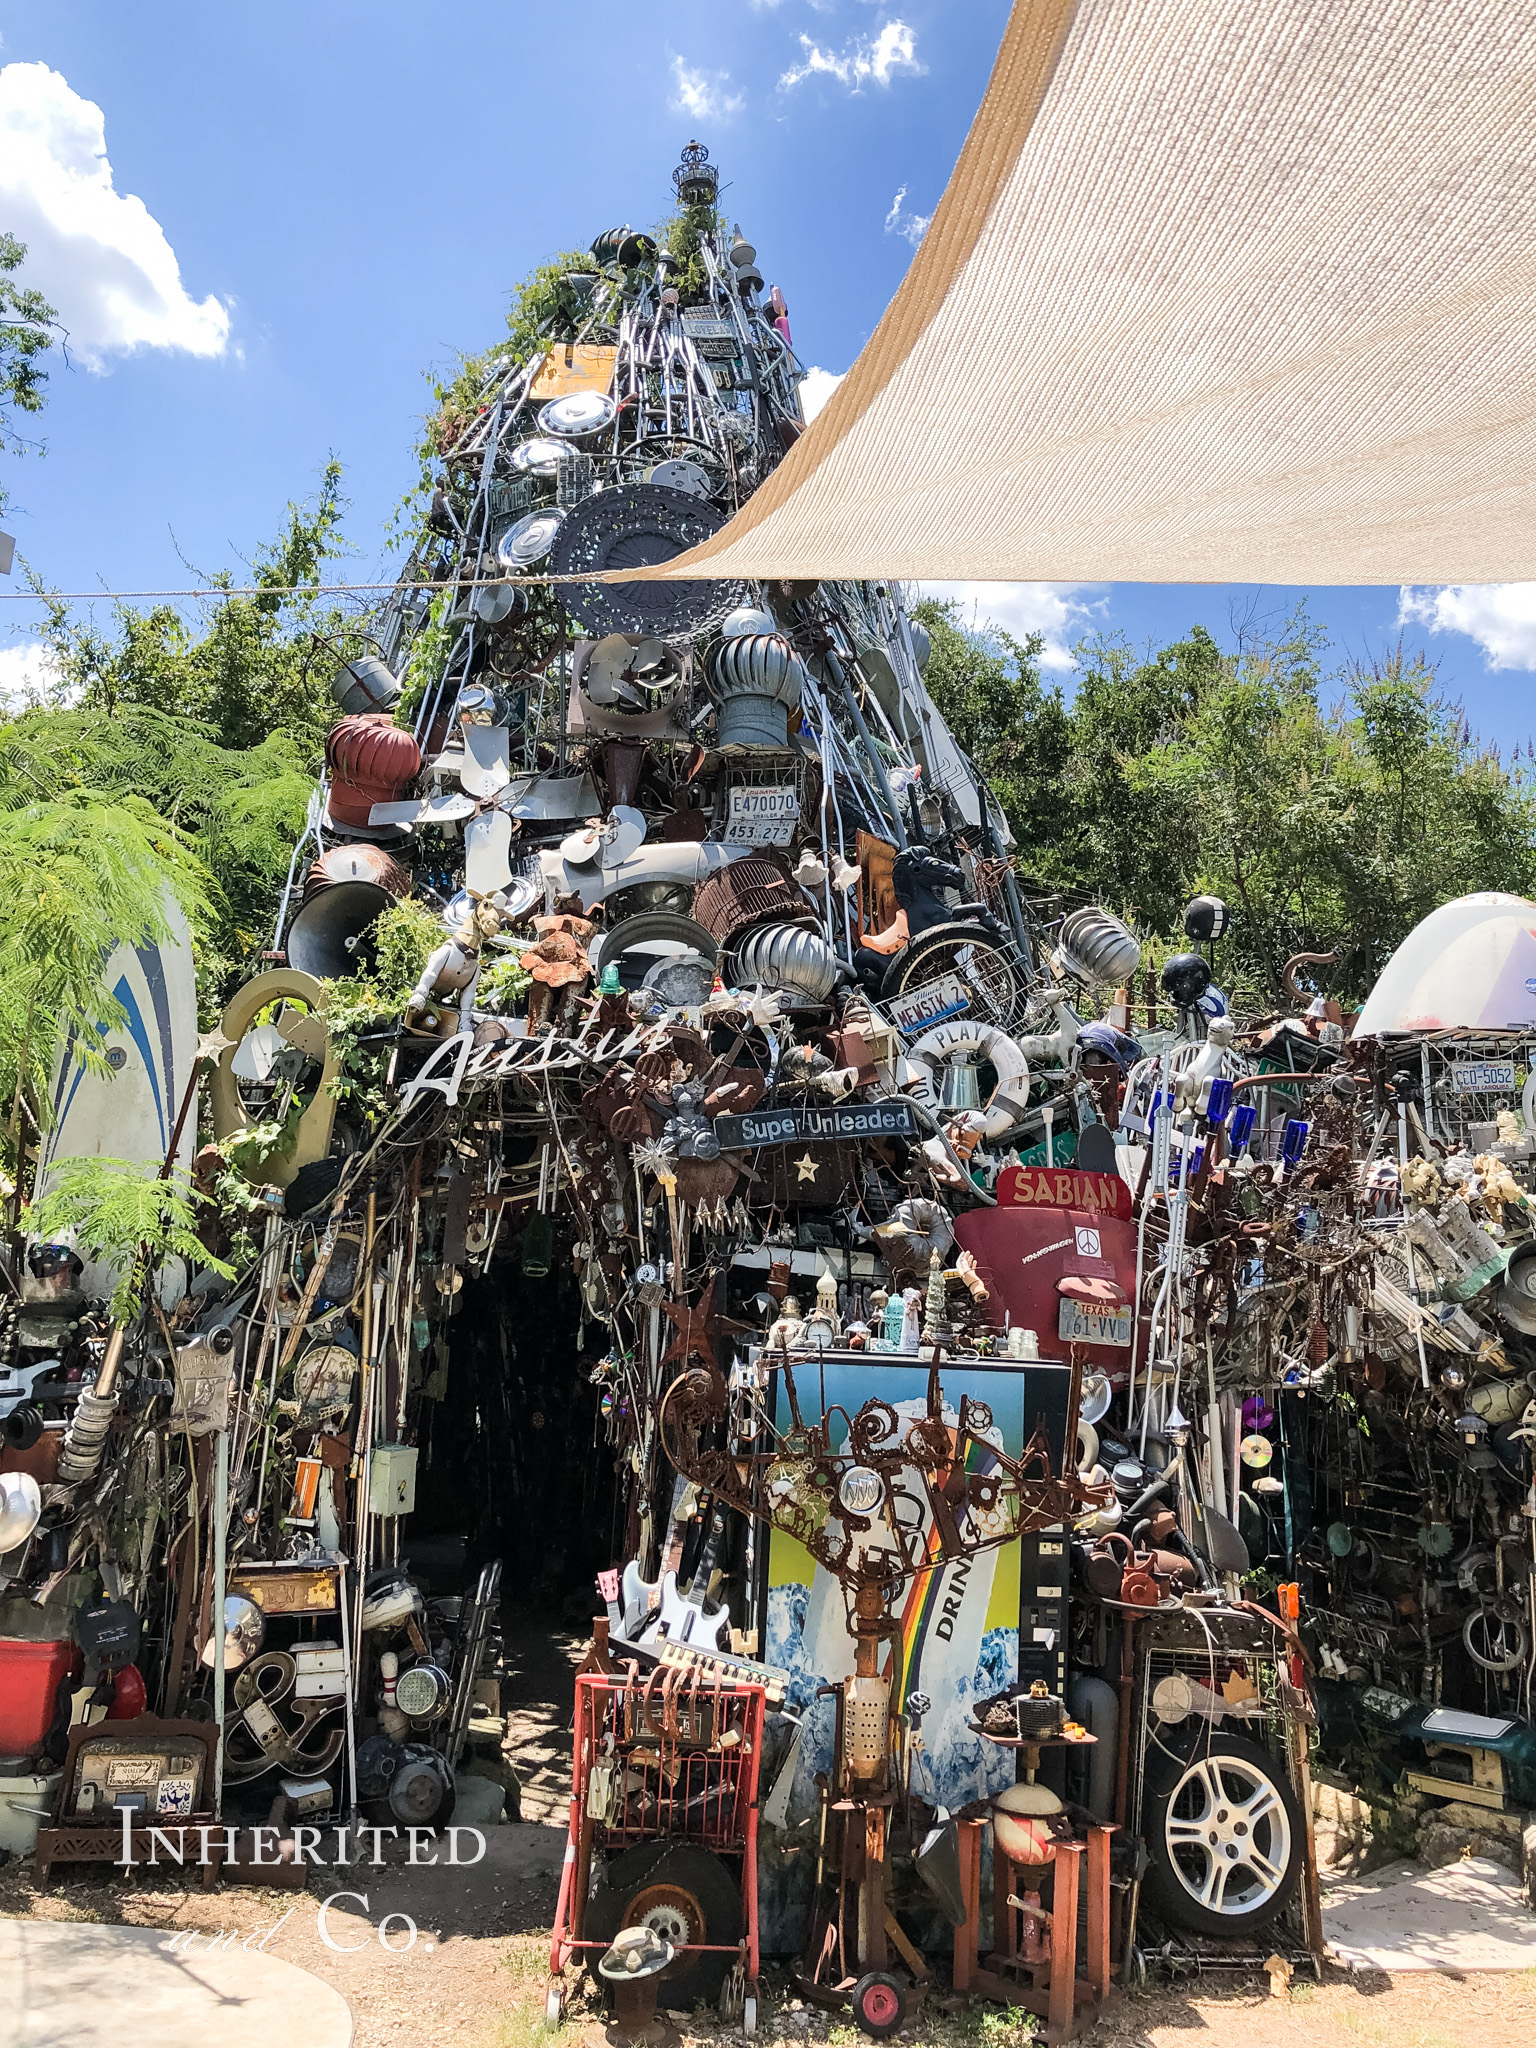 Cathedral of Junk in Austin